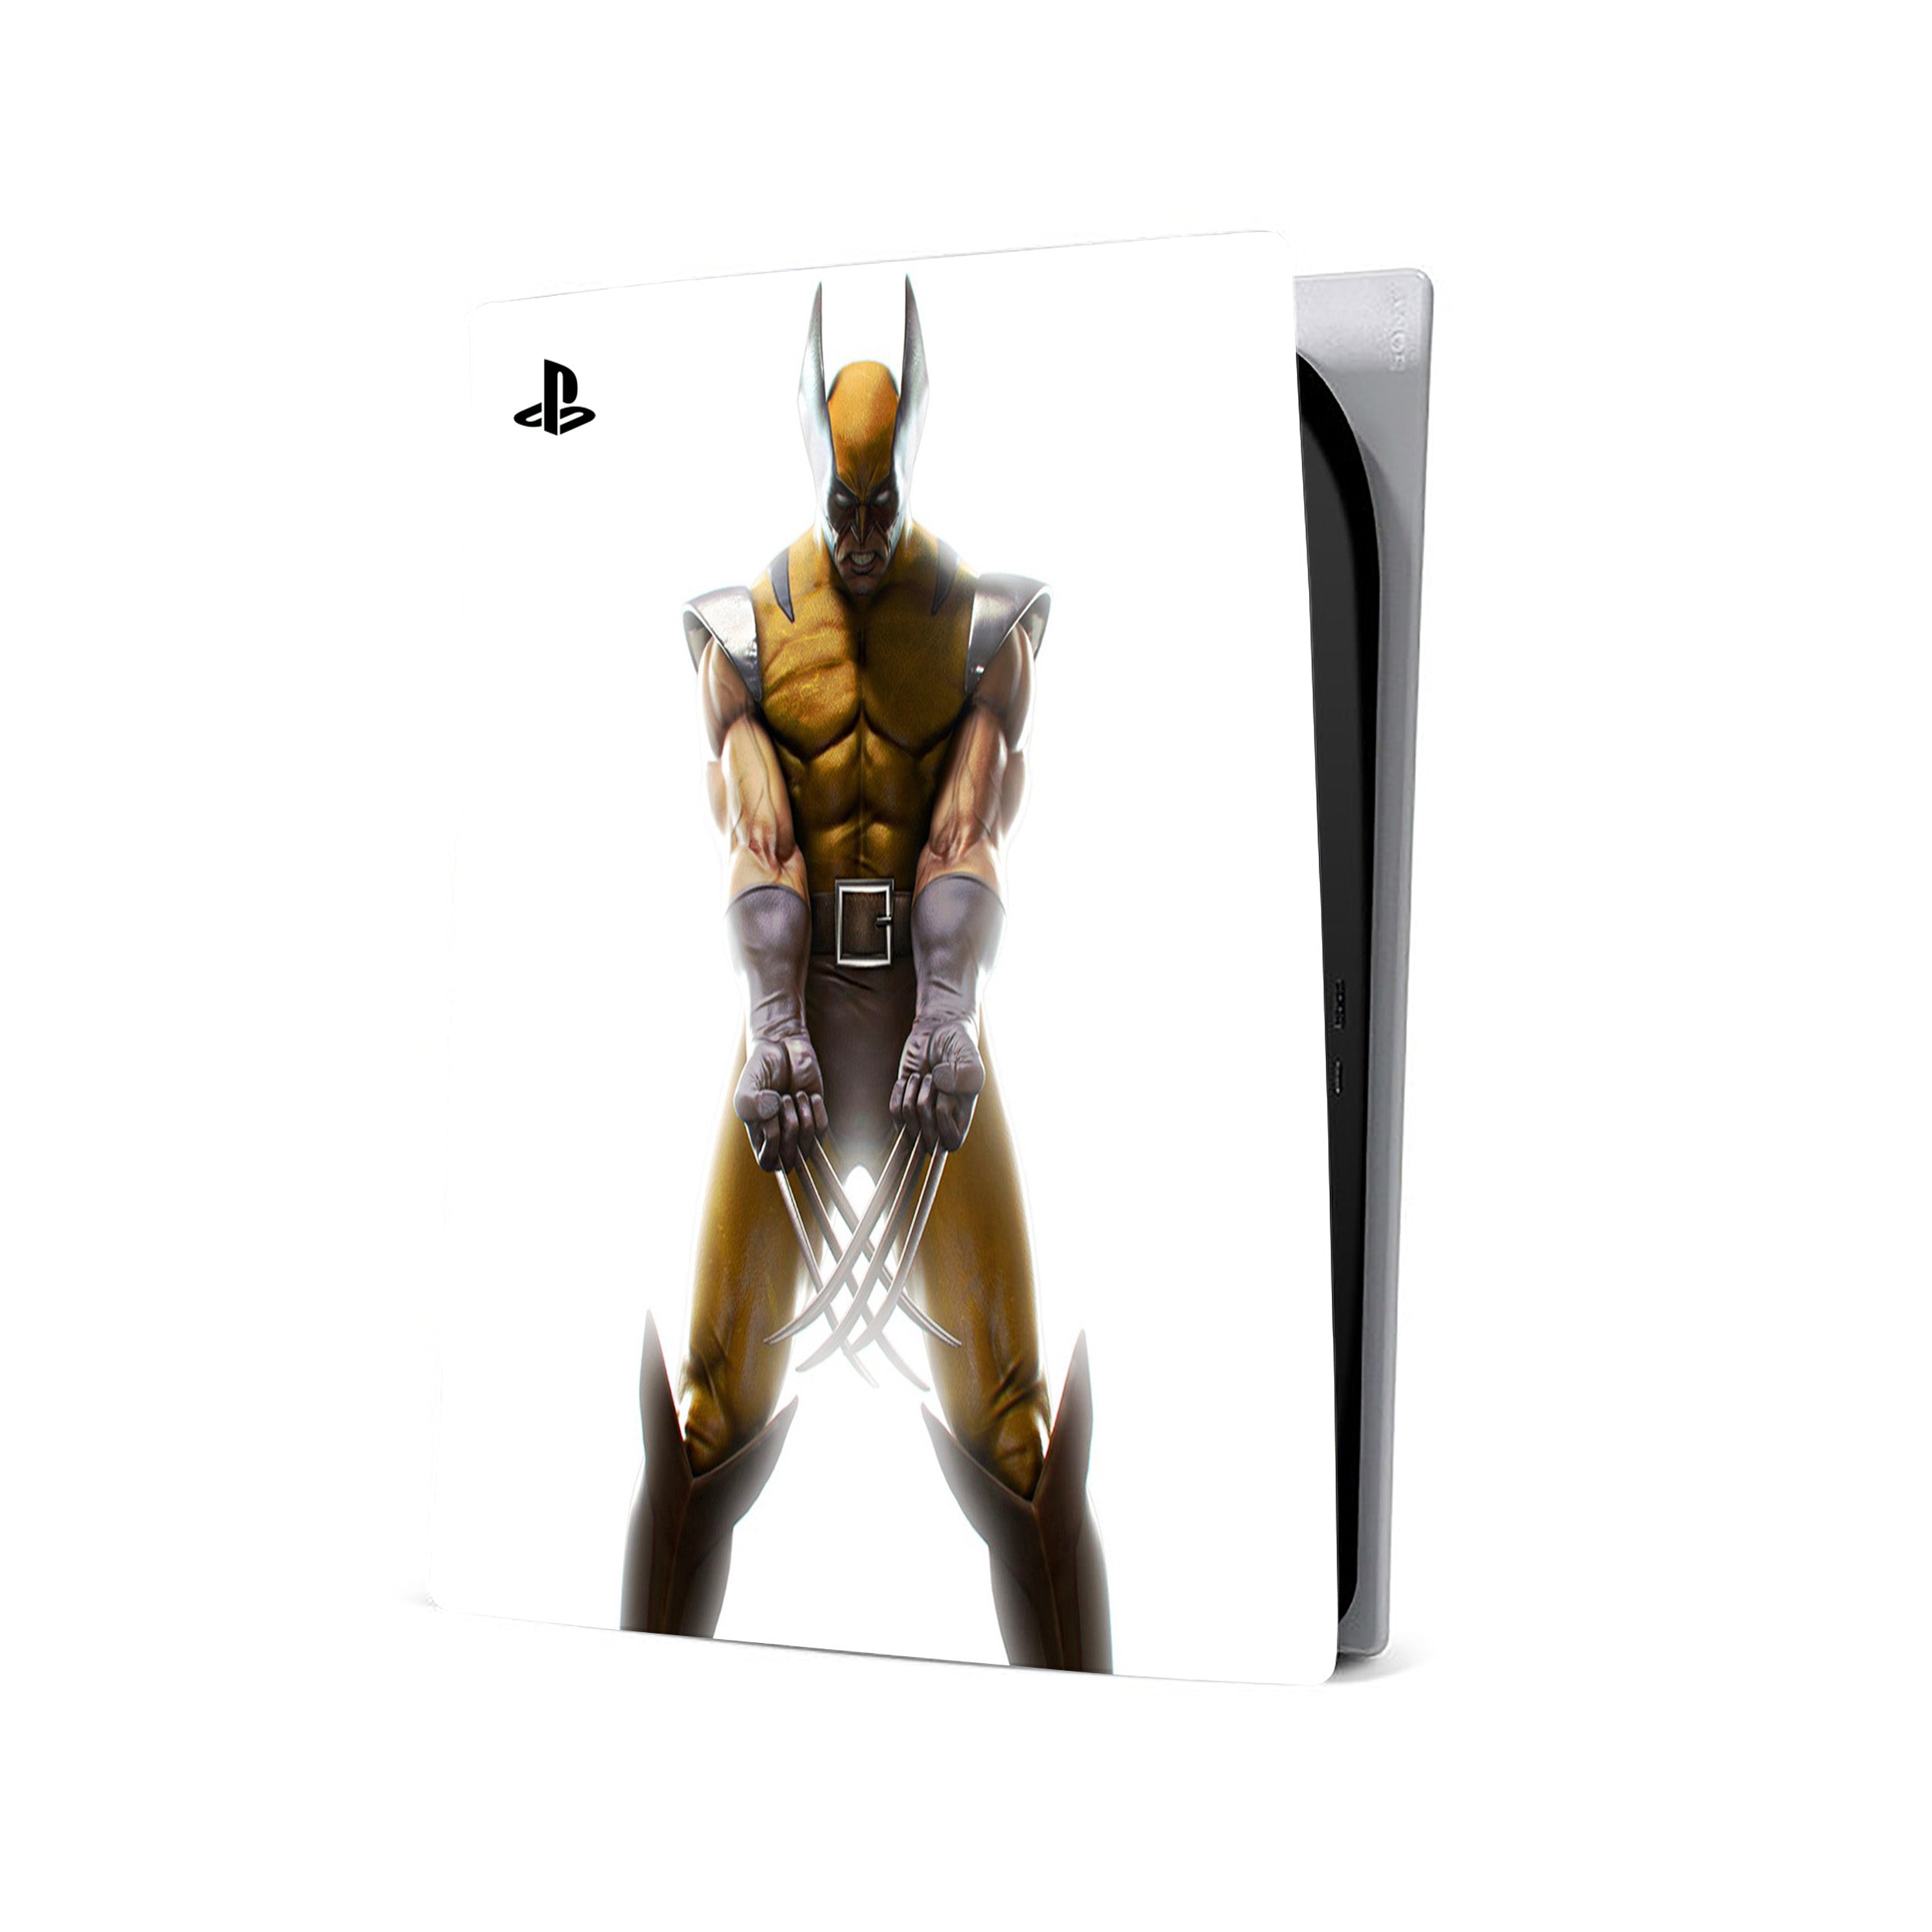 A video game skin featuring a Marvel Comics X Men Wolverine design for the PS5.